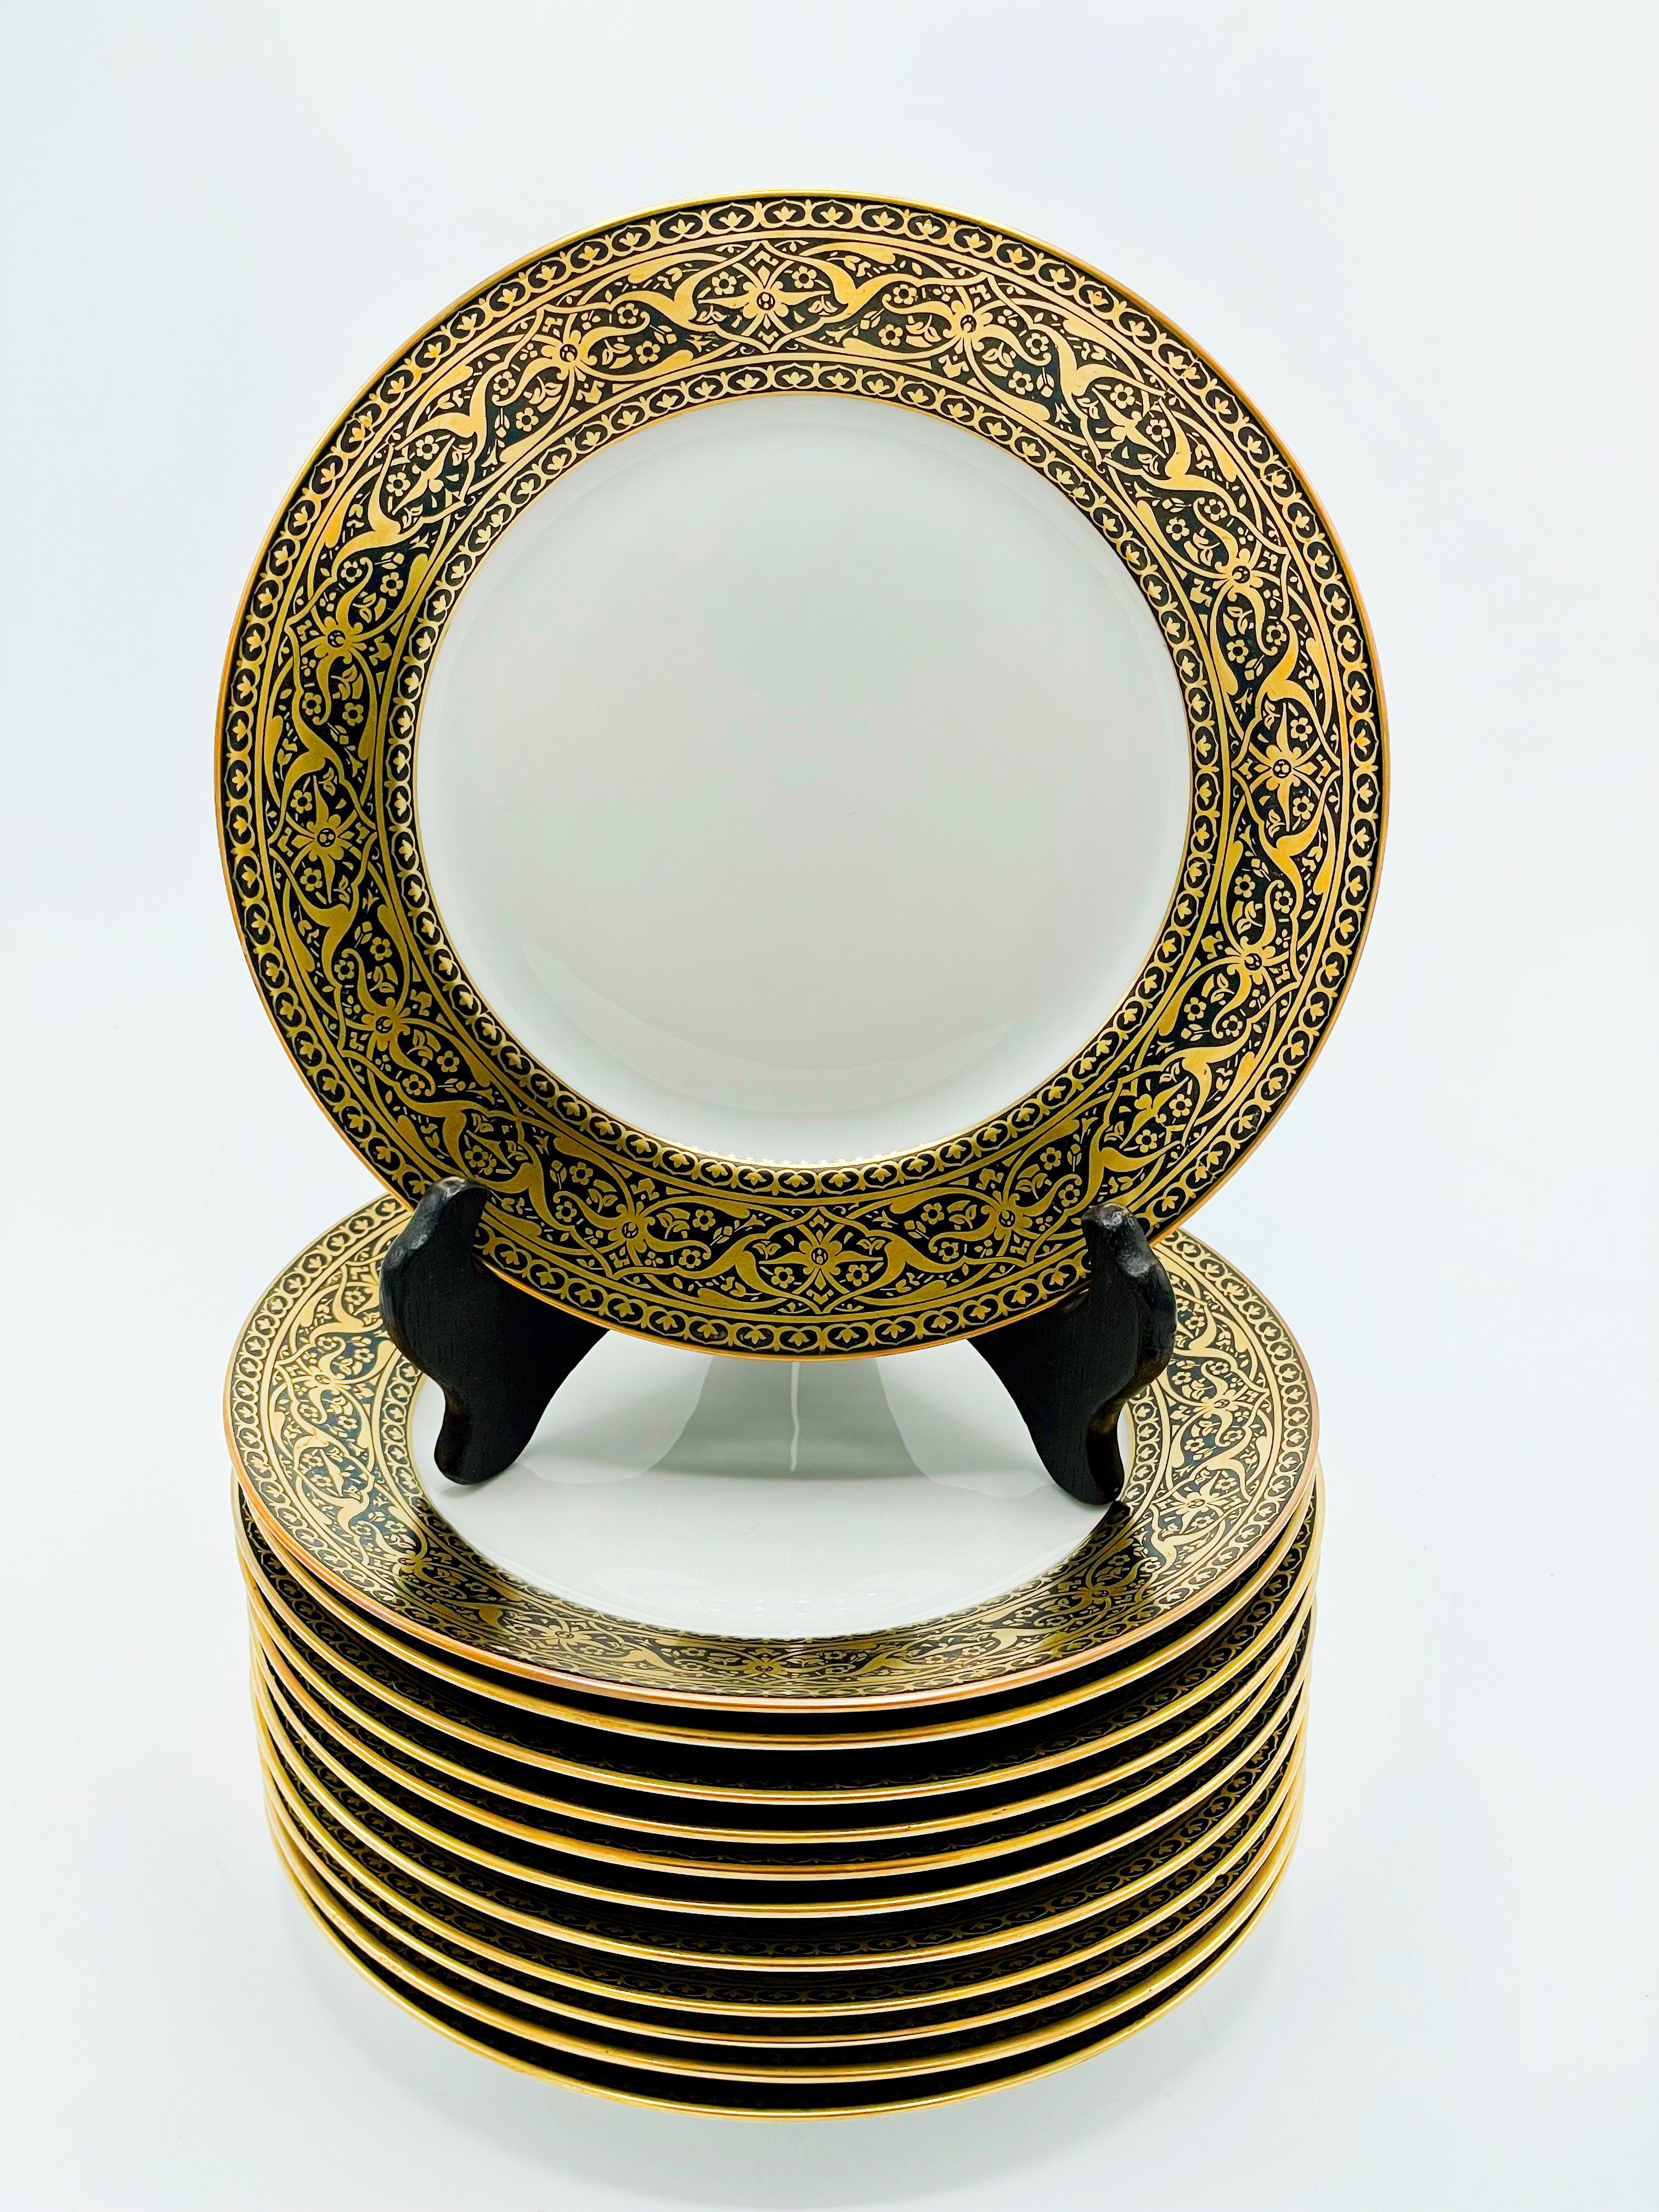 A Set of twelve French Black and Gold dessert plate with elaborate borders. 
The white porcelain with an exotic persinan style border marked Limoges France Superieur. Size: 18,5 centimeters diameter.